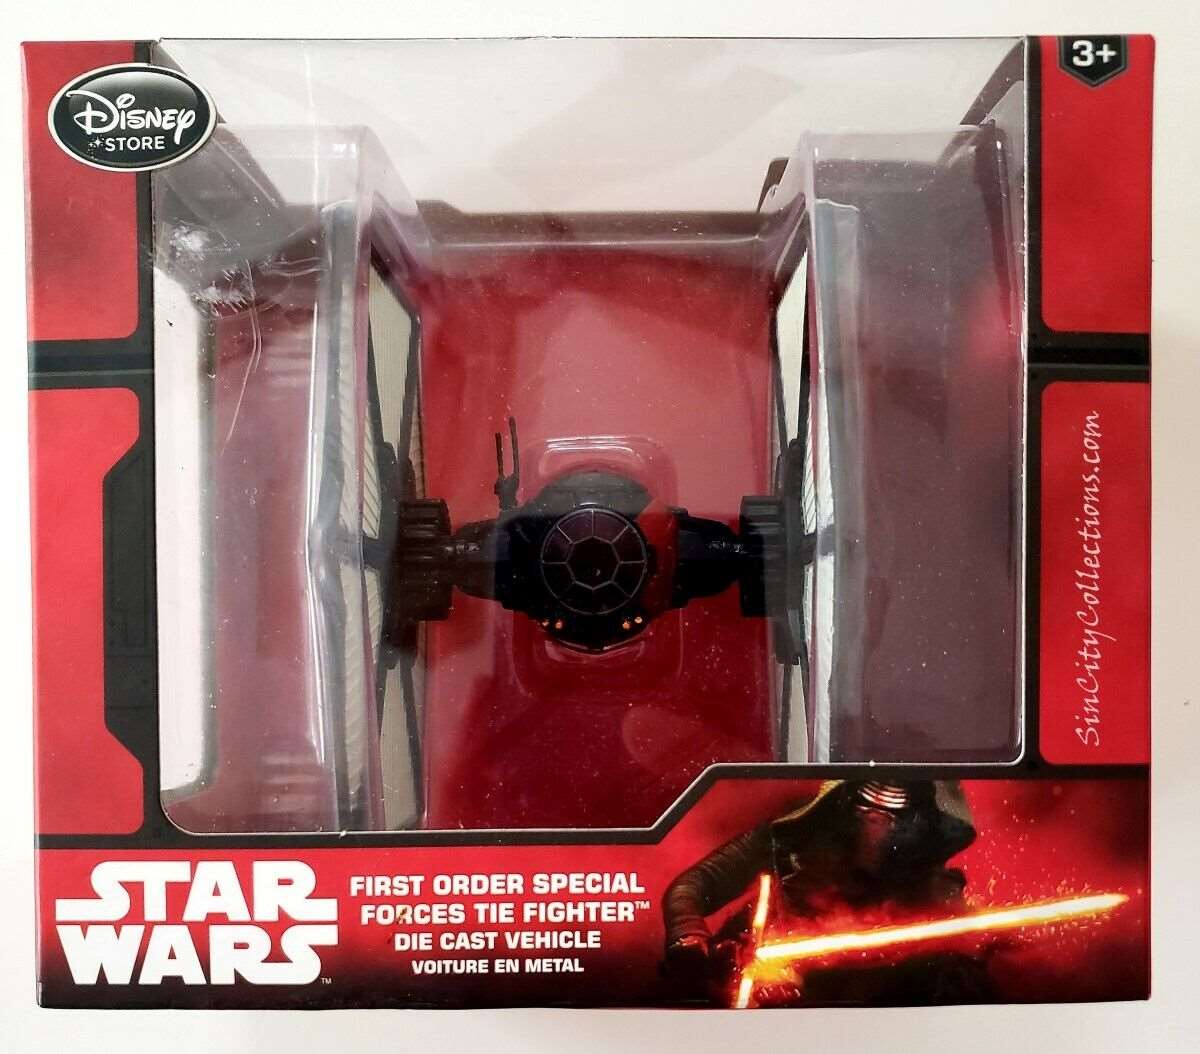 Star Wars Disney Store Exclusive First Order Special Forces TIE Fighter